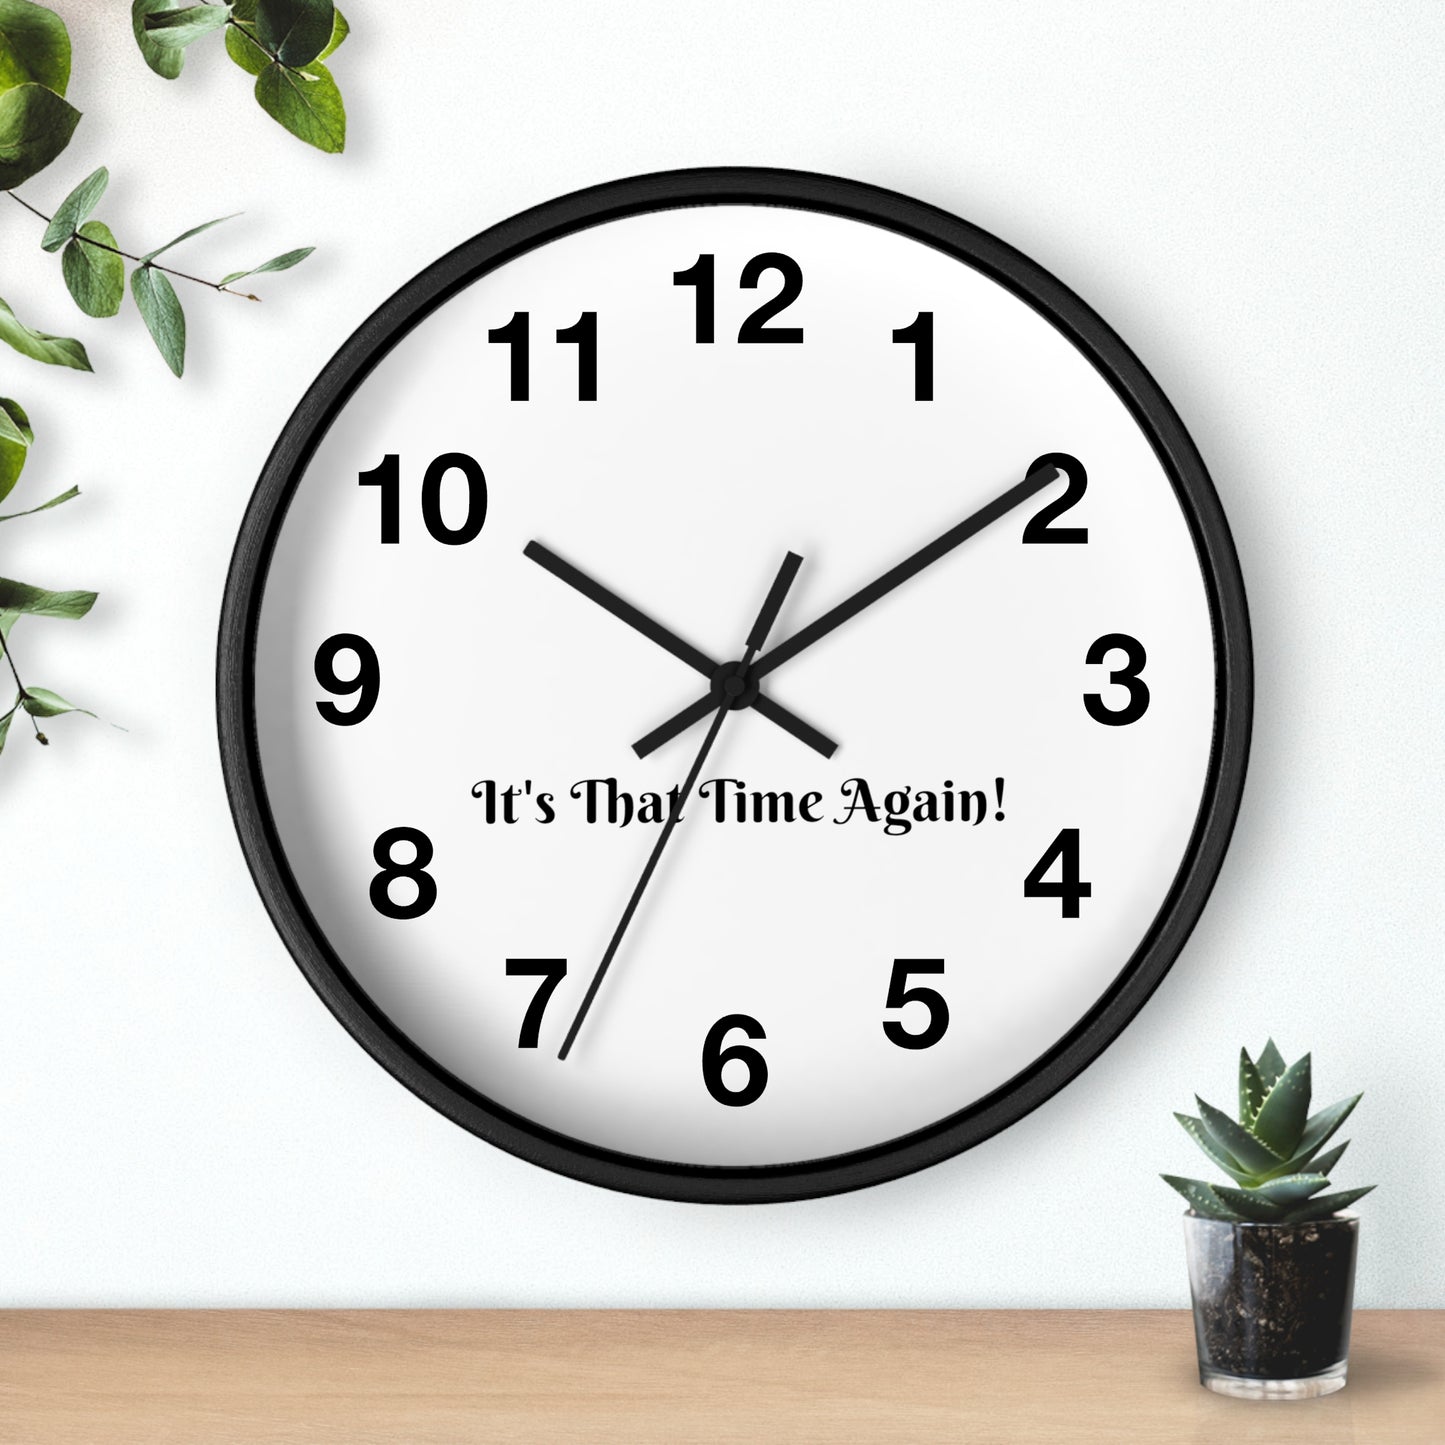 "It's That Time Again!" Wall Clock: Quirky & Fun Timepiece